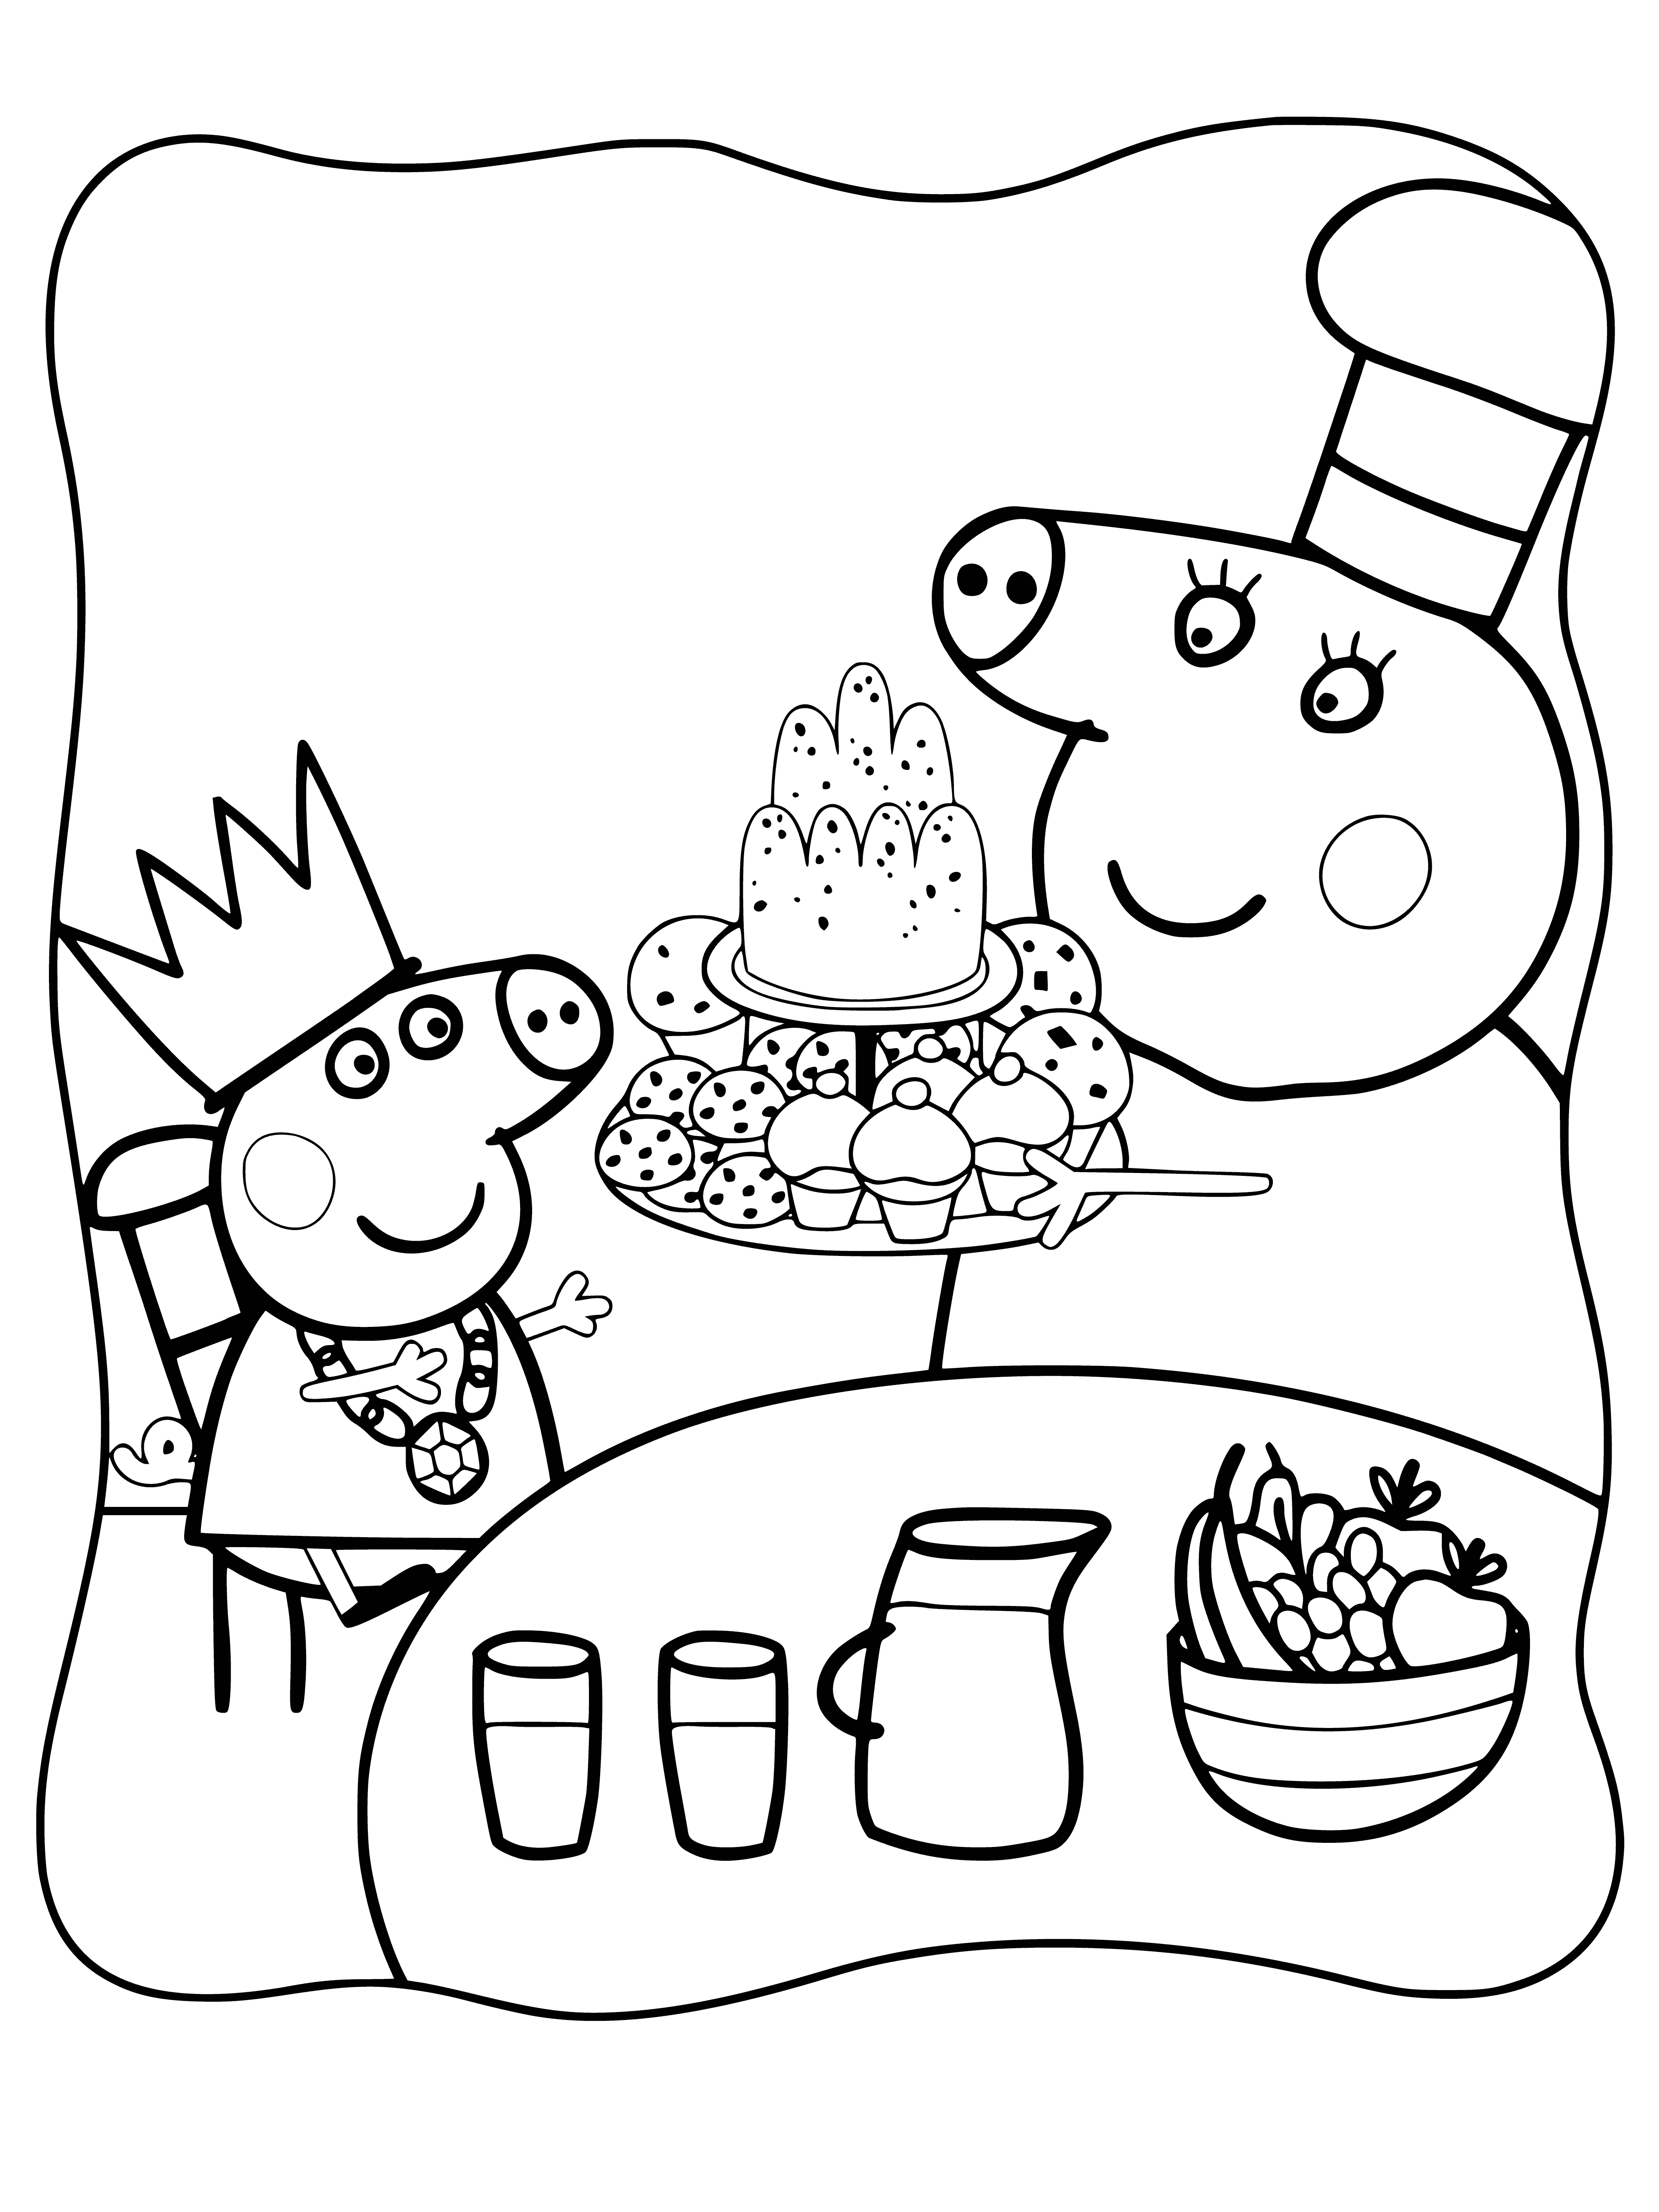 Granny Pig prepared a treat coloring page